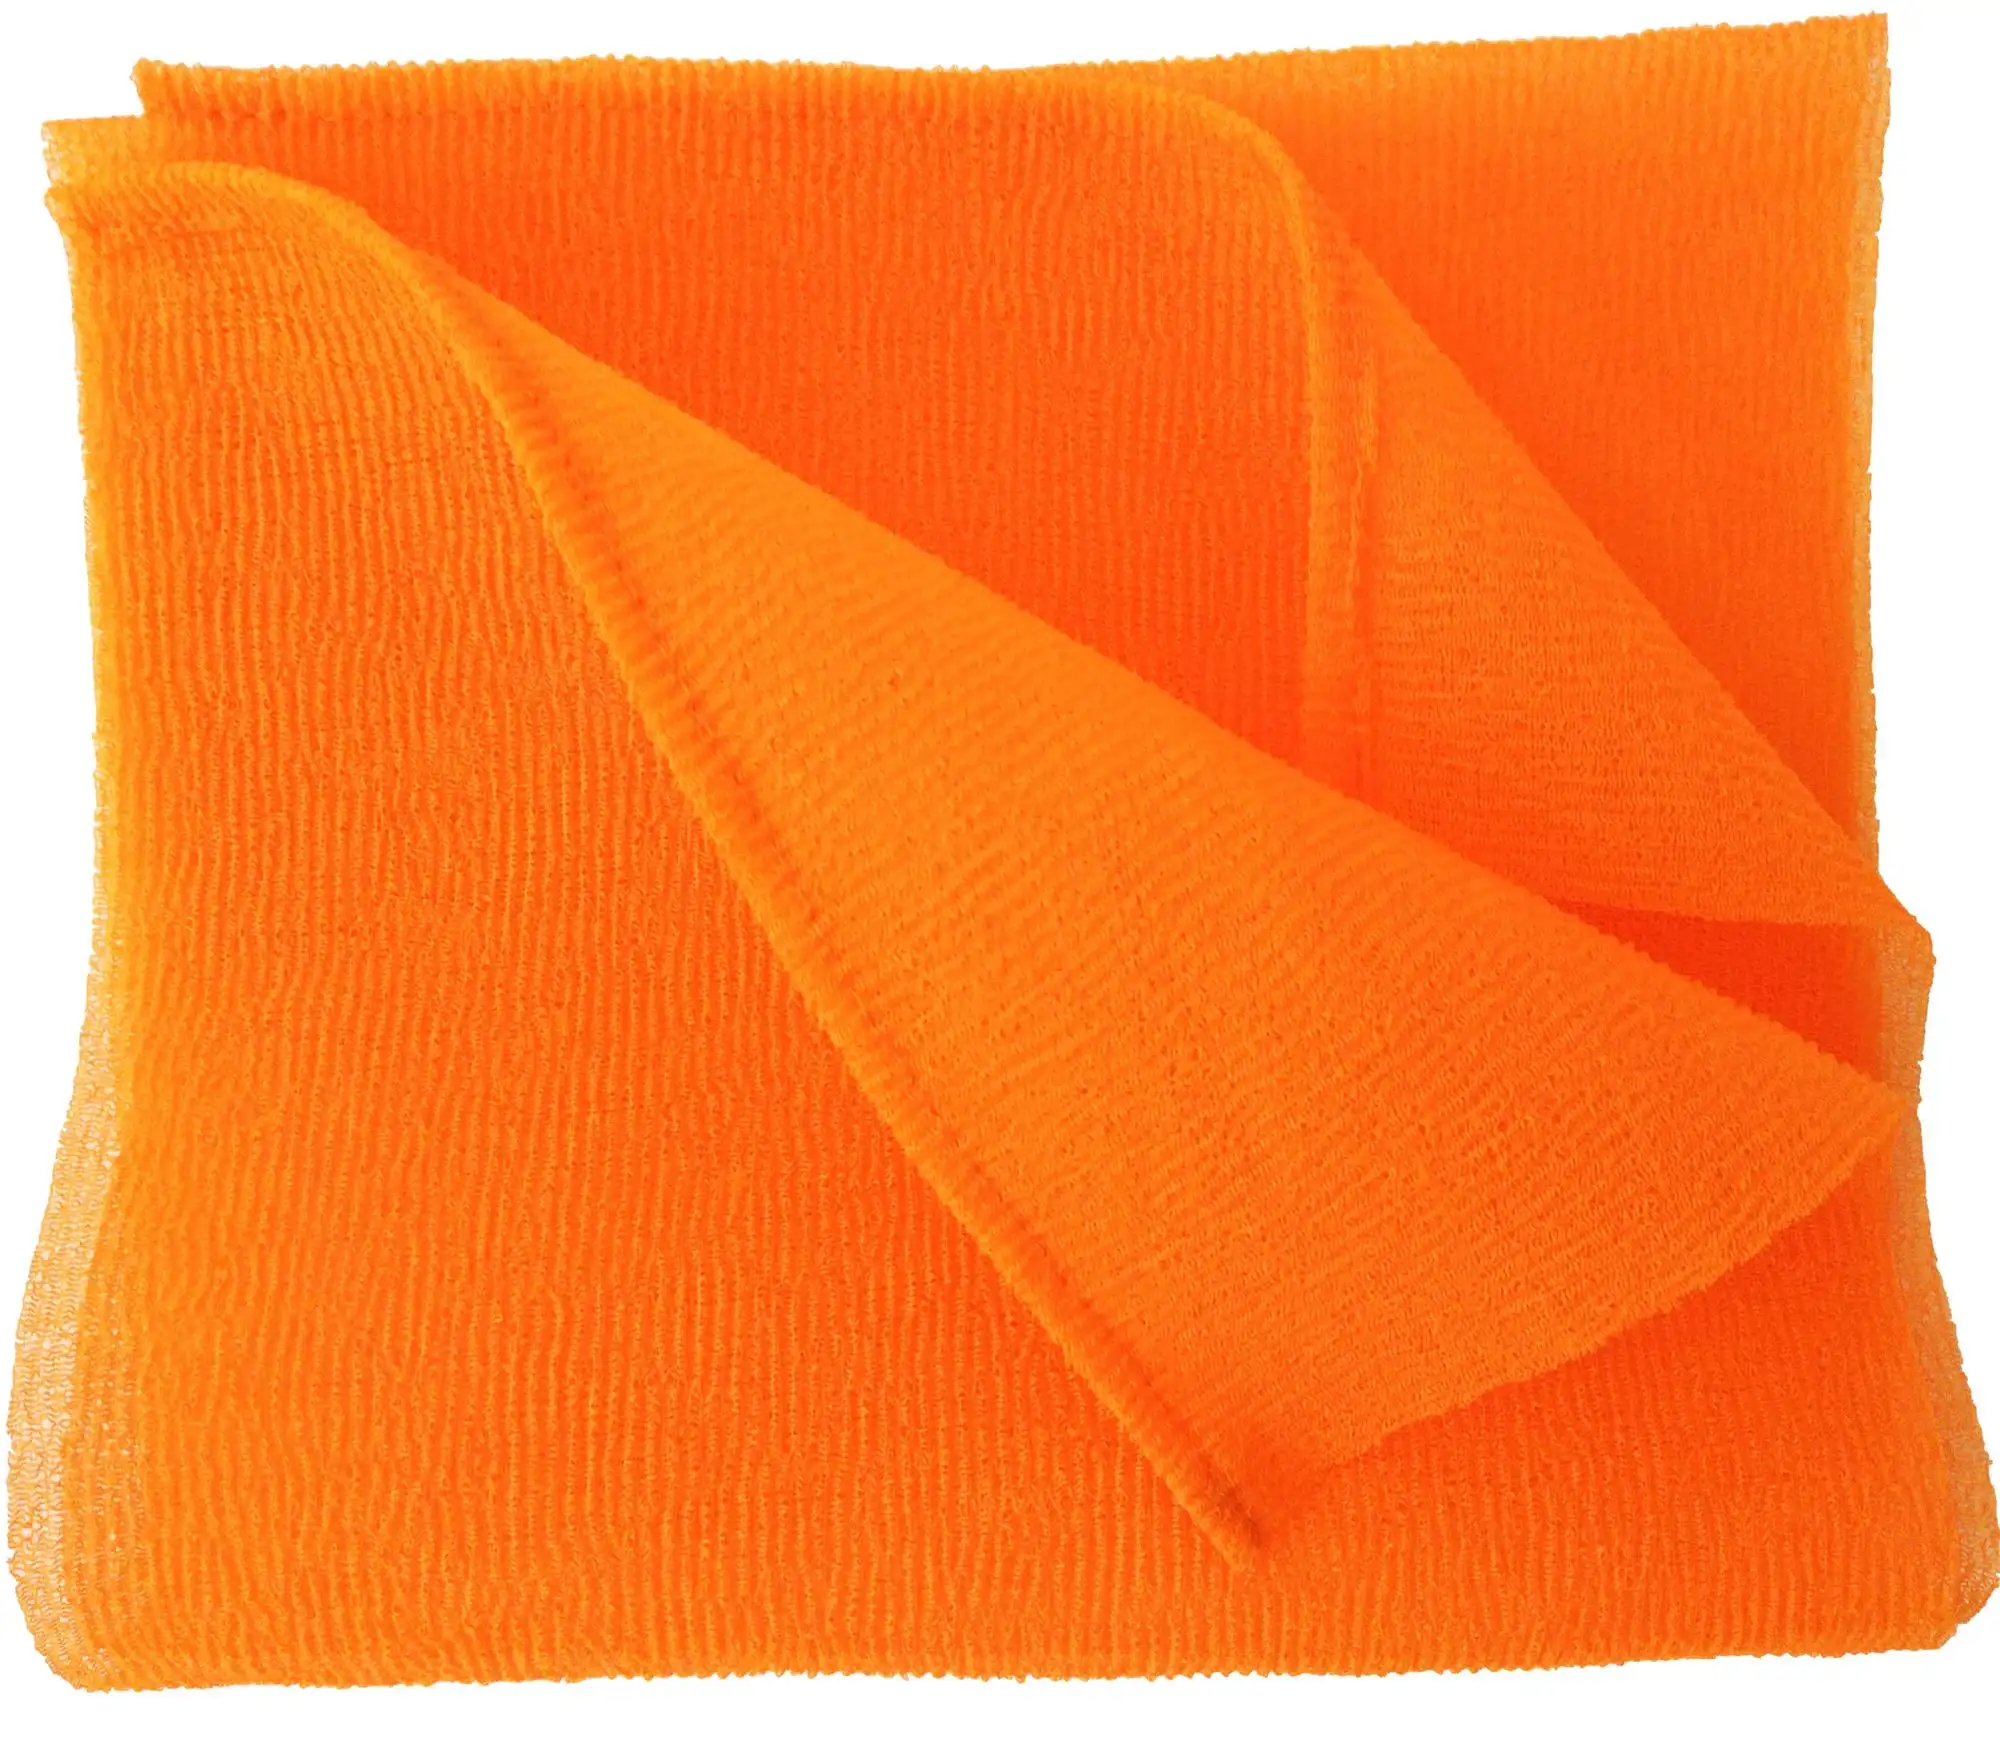 NEW Free Sample Exfoliating Towel Soft Nylon Wash Cloth Body Bath Cleaning Sponges for Shower